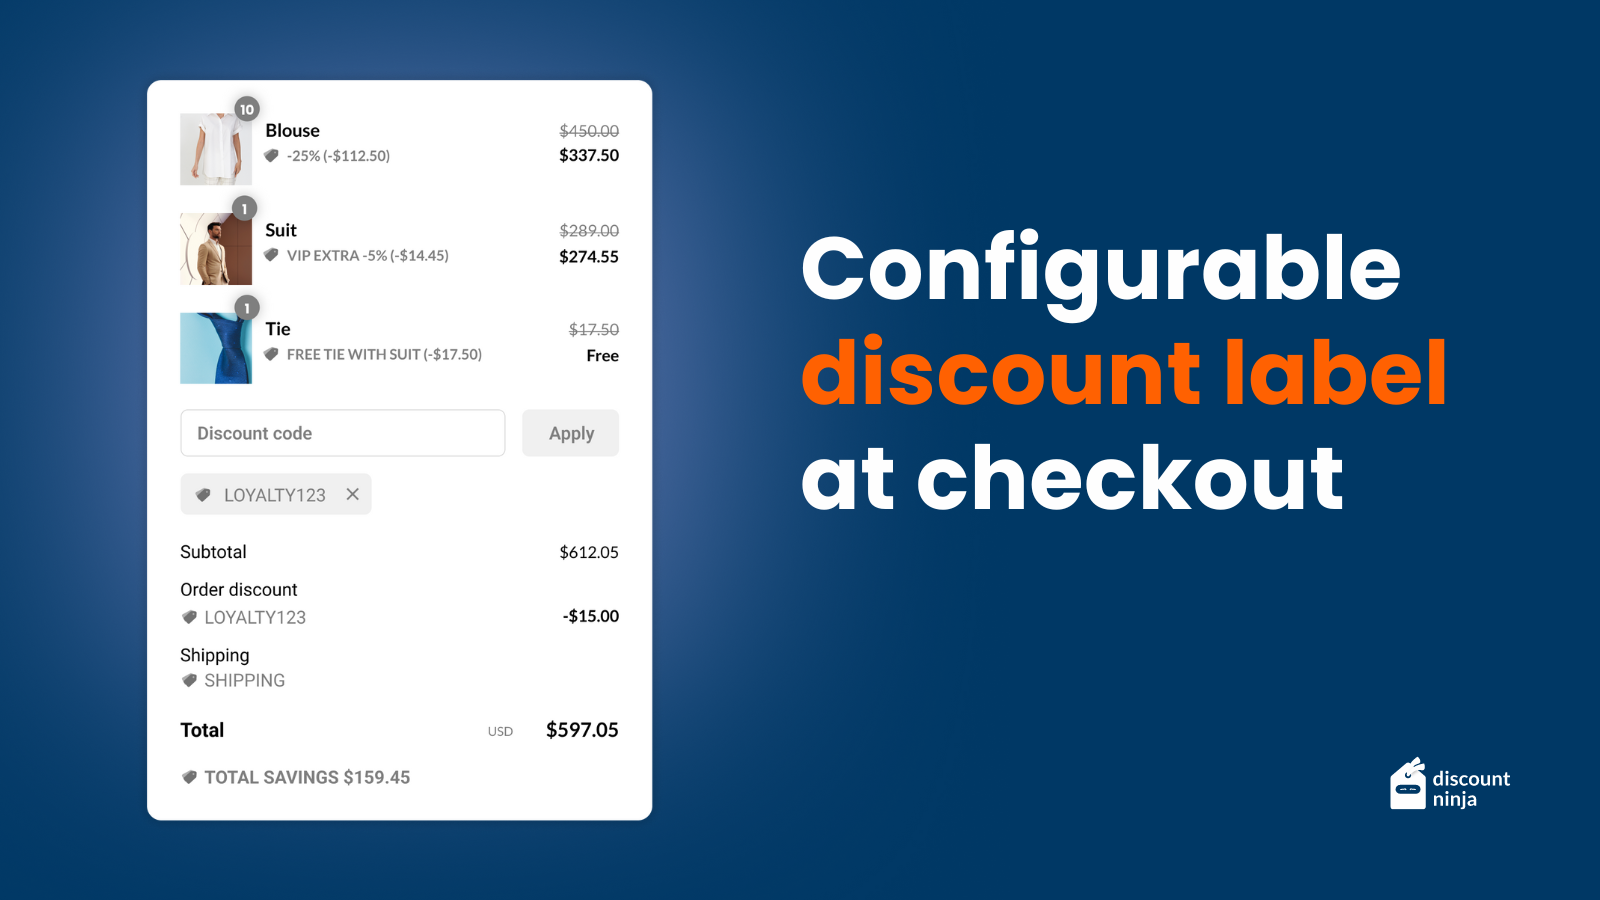 Clear indication of discounts at checkout